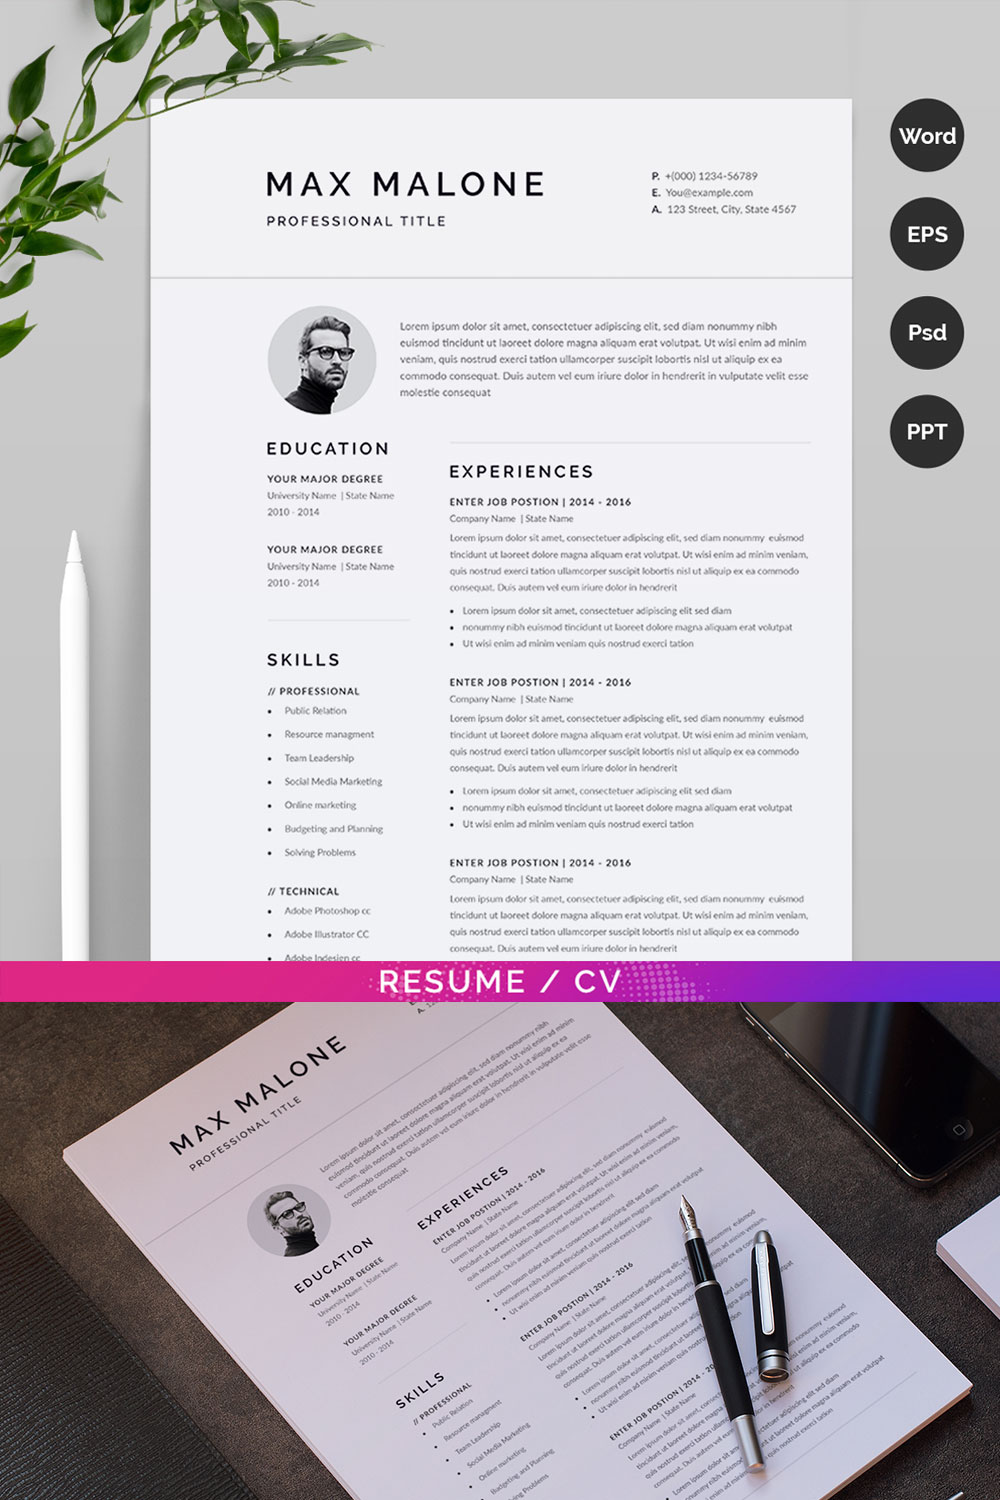 Clean and modern resume template with a pink border.